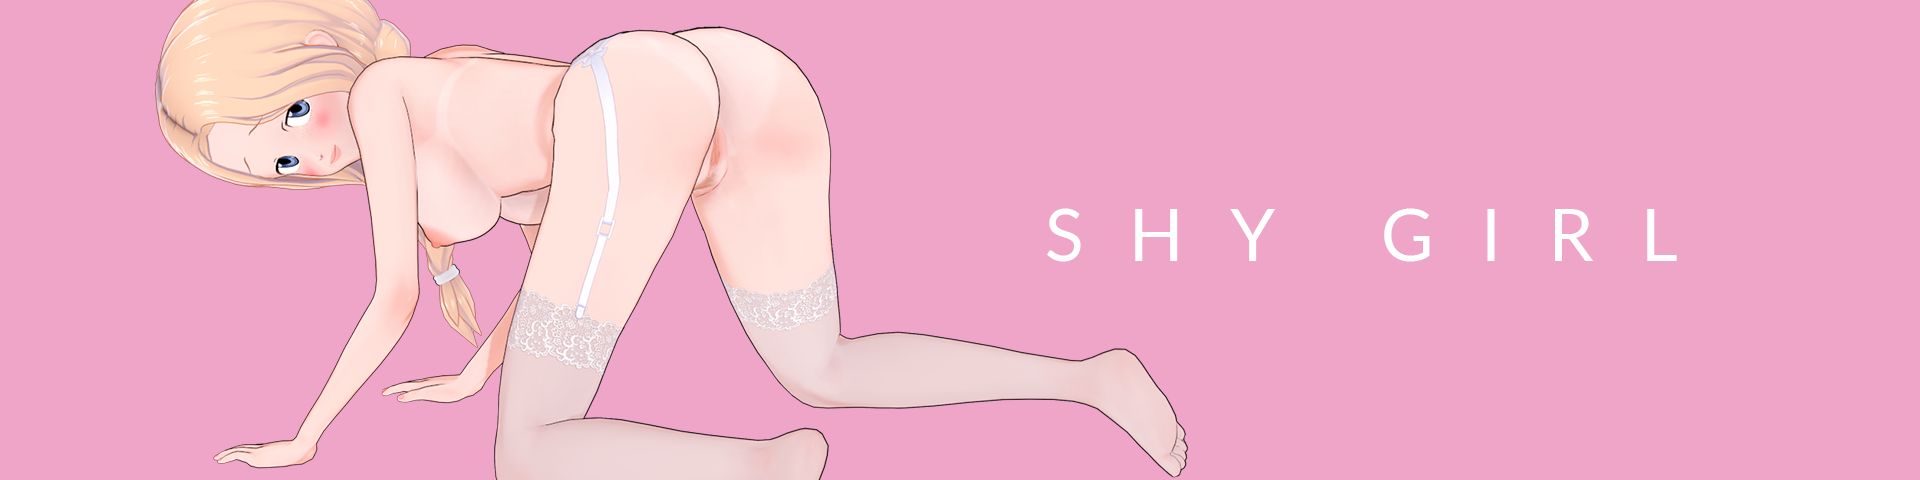 Shy Girl Apk Android Adult Game Download (16)